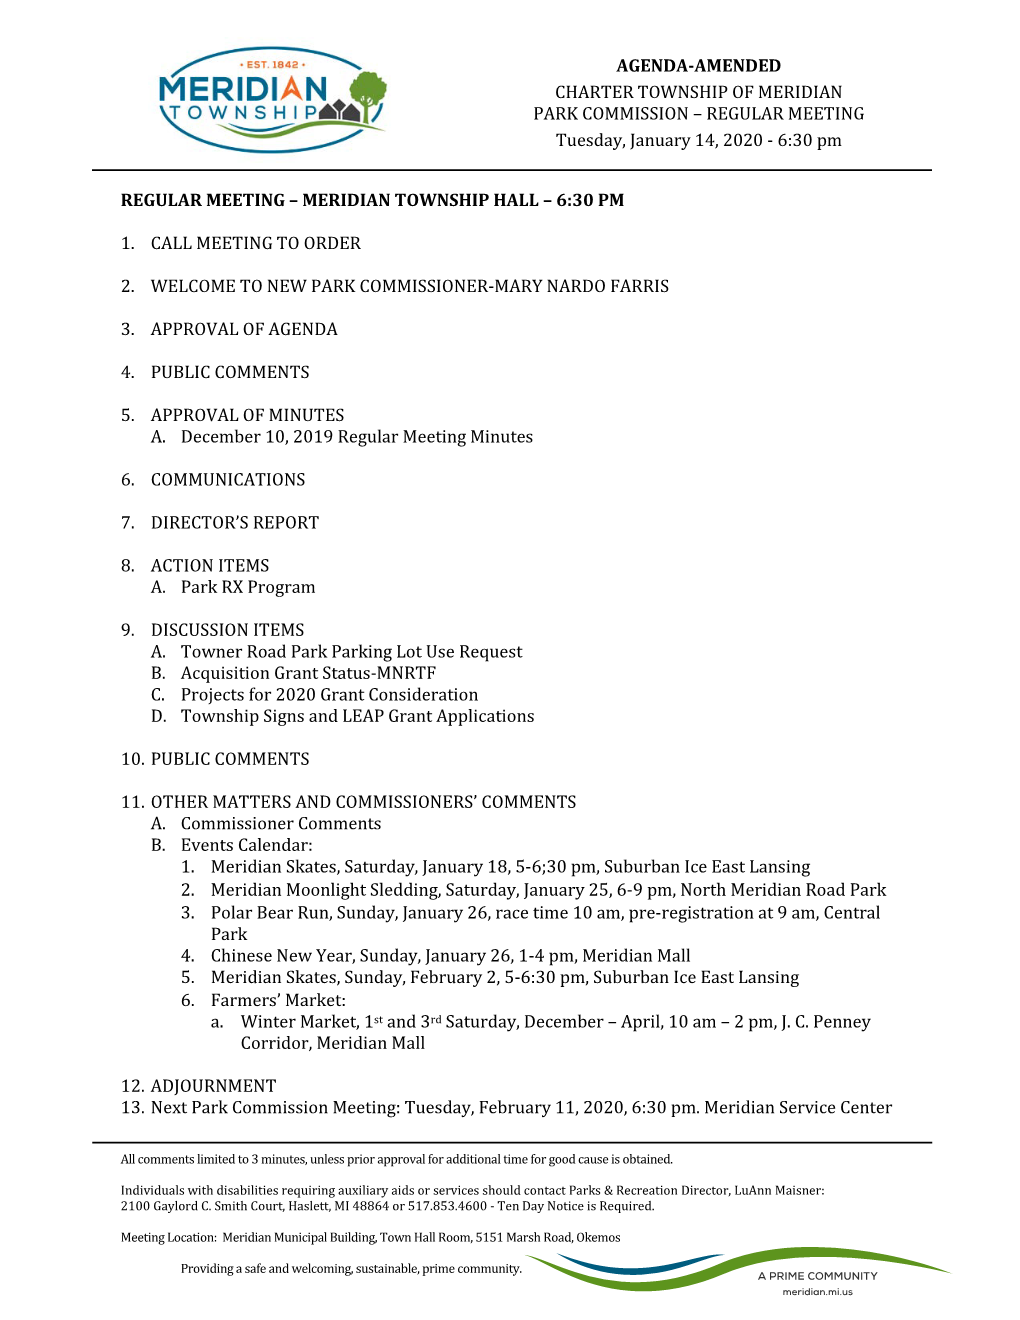 AGENDA-AMENDED CHARTER TOWNSHIP of MERIDIAN PARK COMMISSION – REGULAR MEETING Tuesday, January 14, 2020 - 6:30 Pm